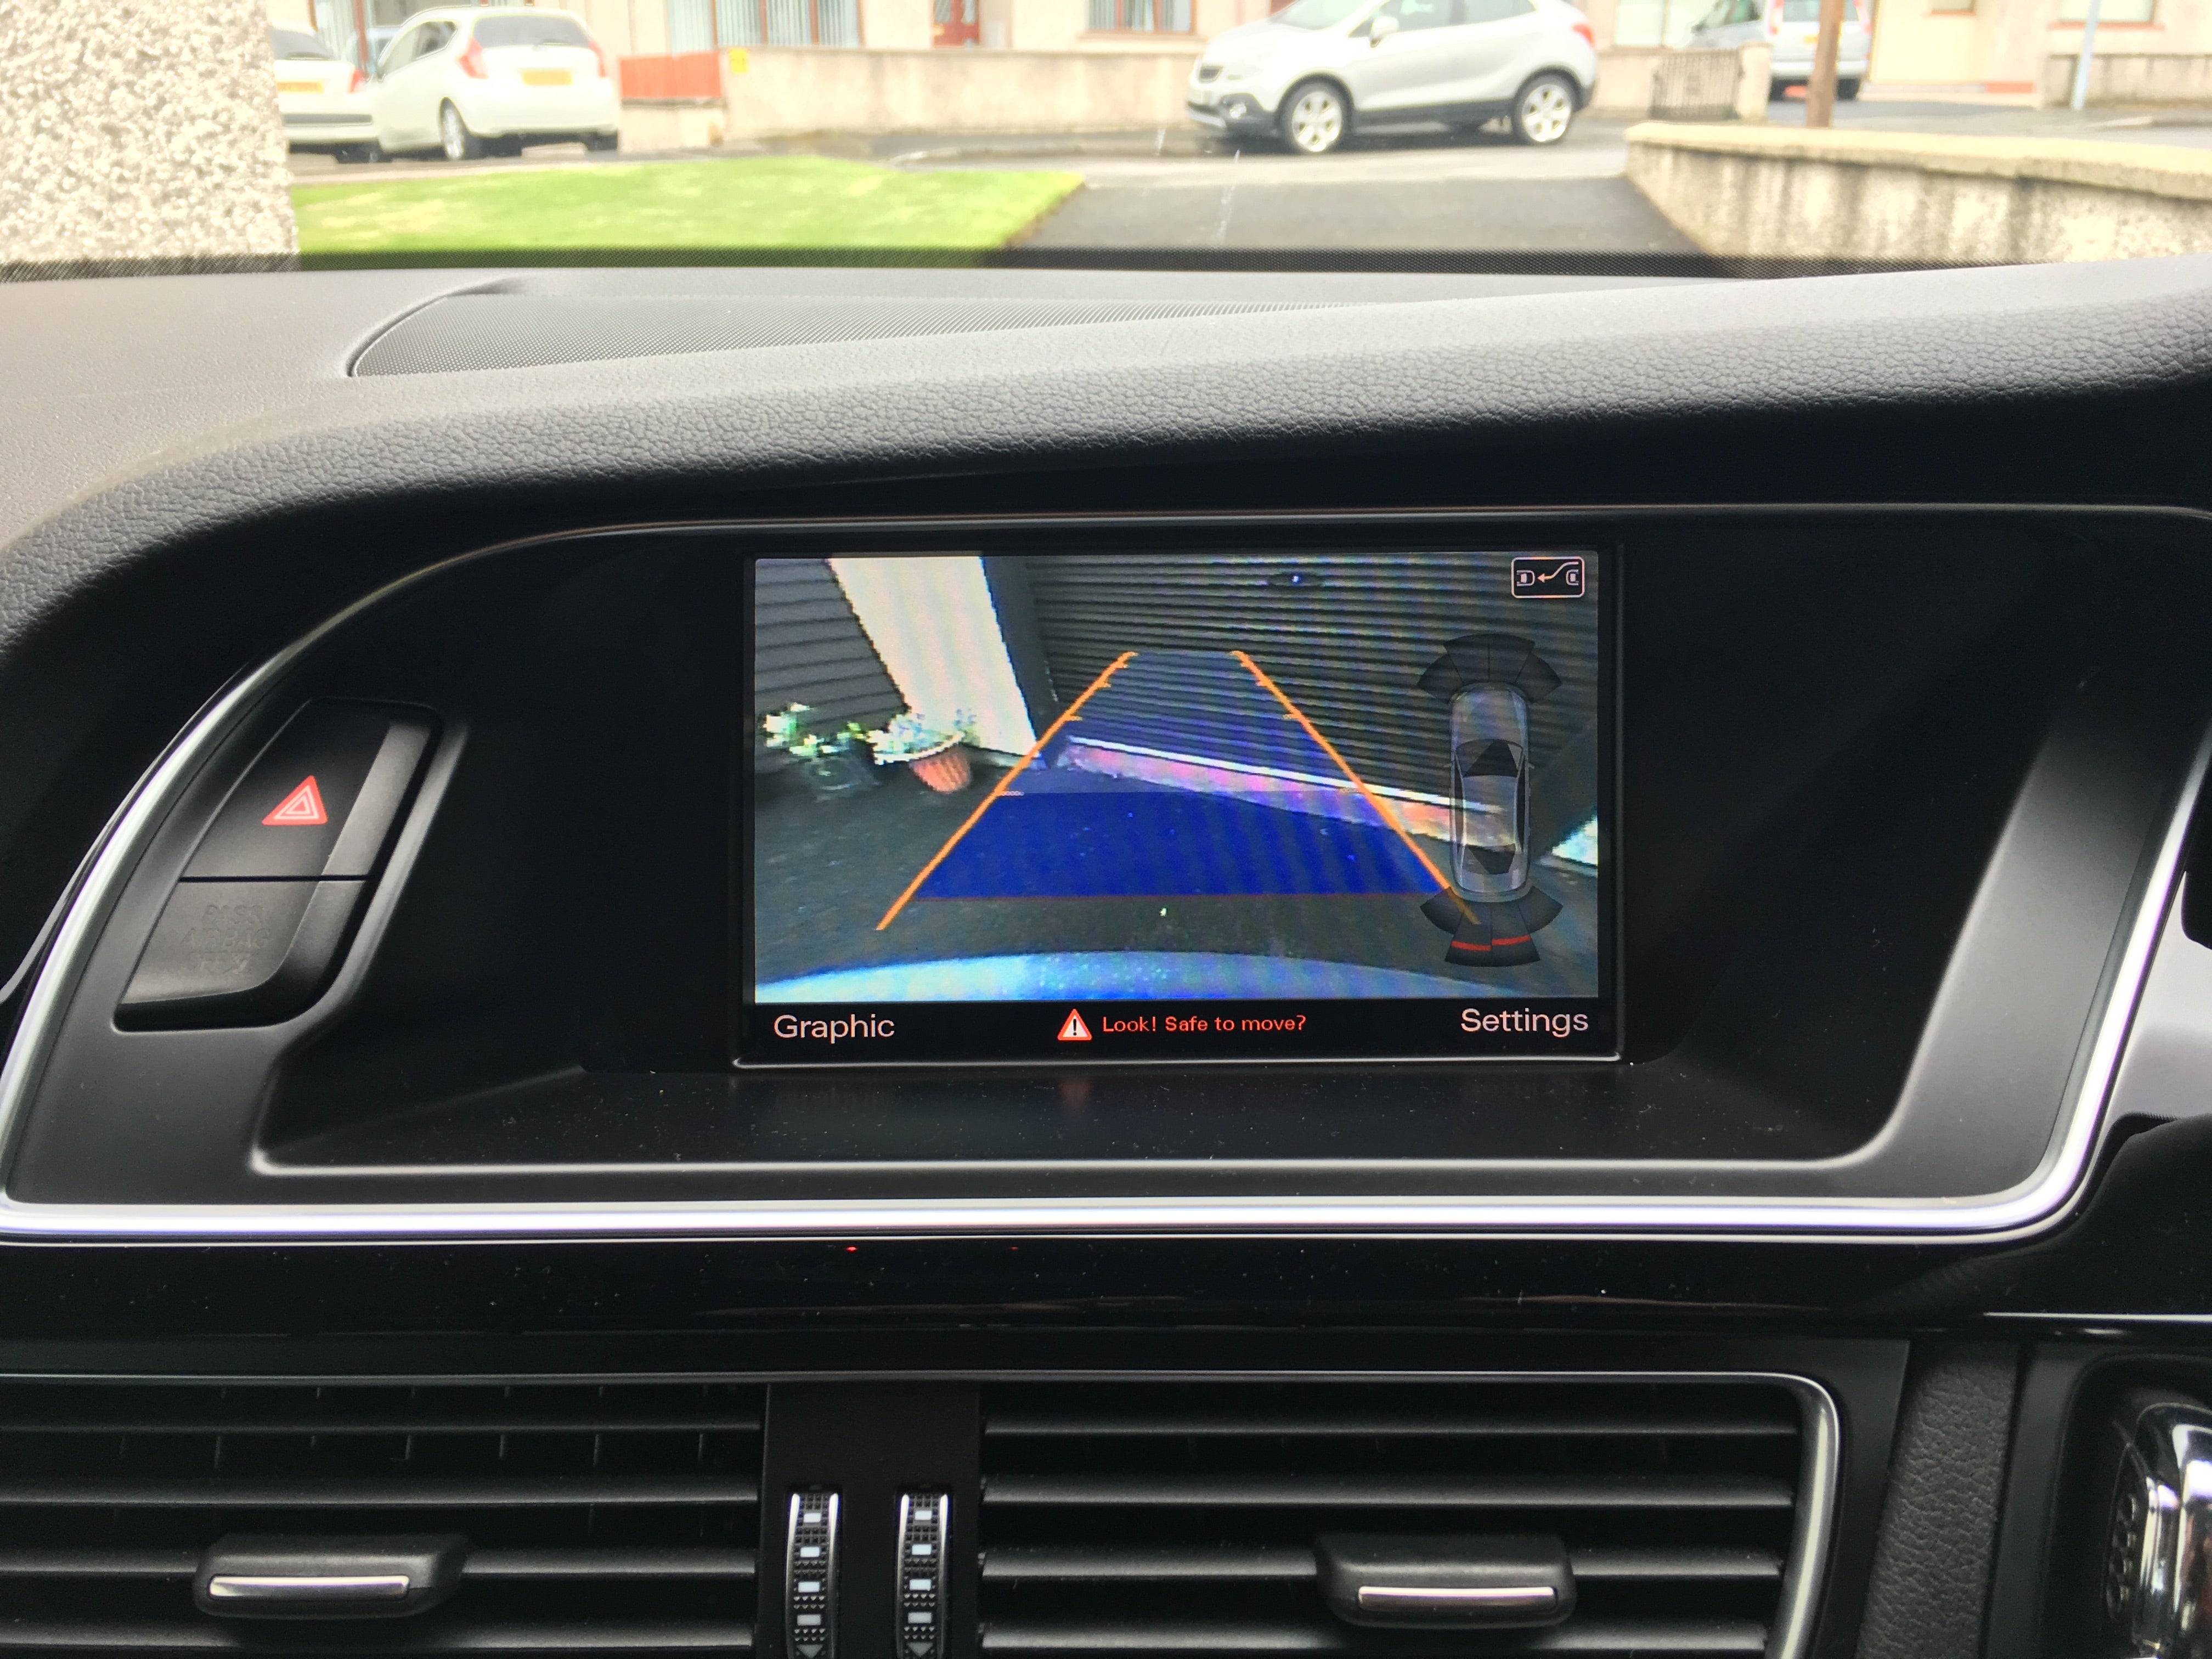 Factory Reverse Camera of Audi A4 2008-2018 | Apple Carplay & Android Auto Module